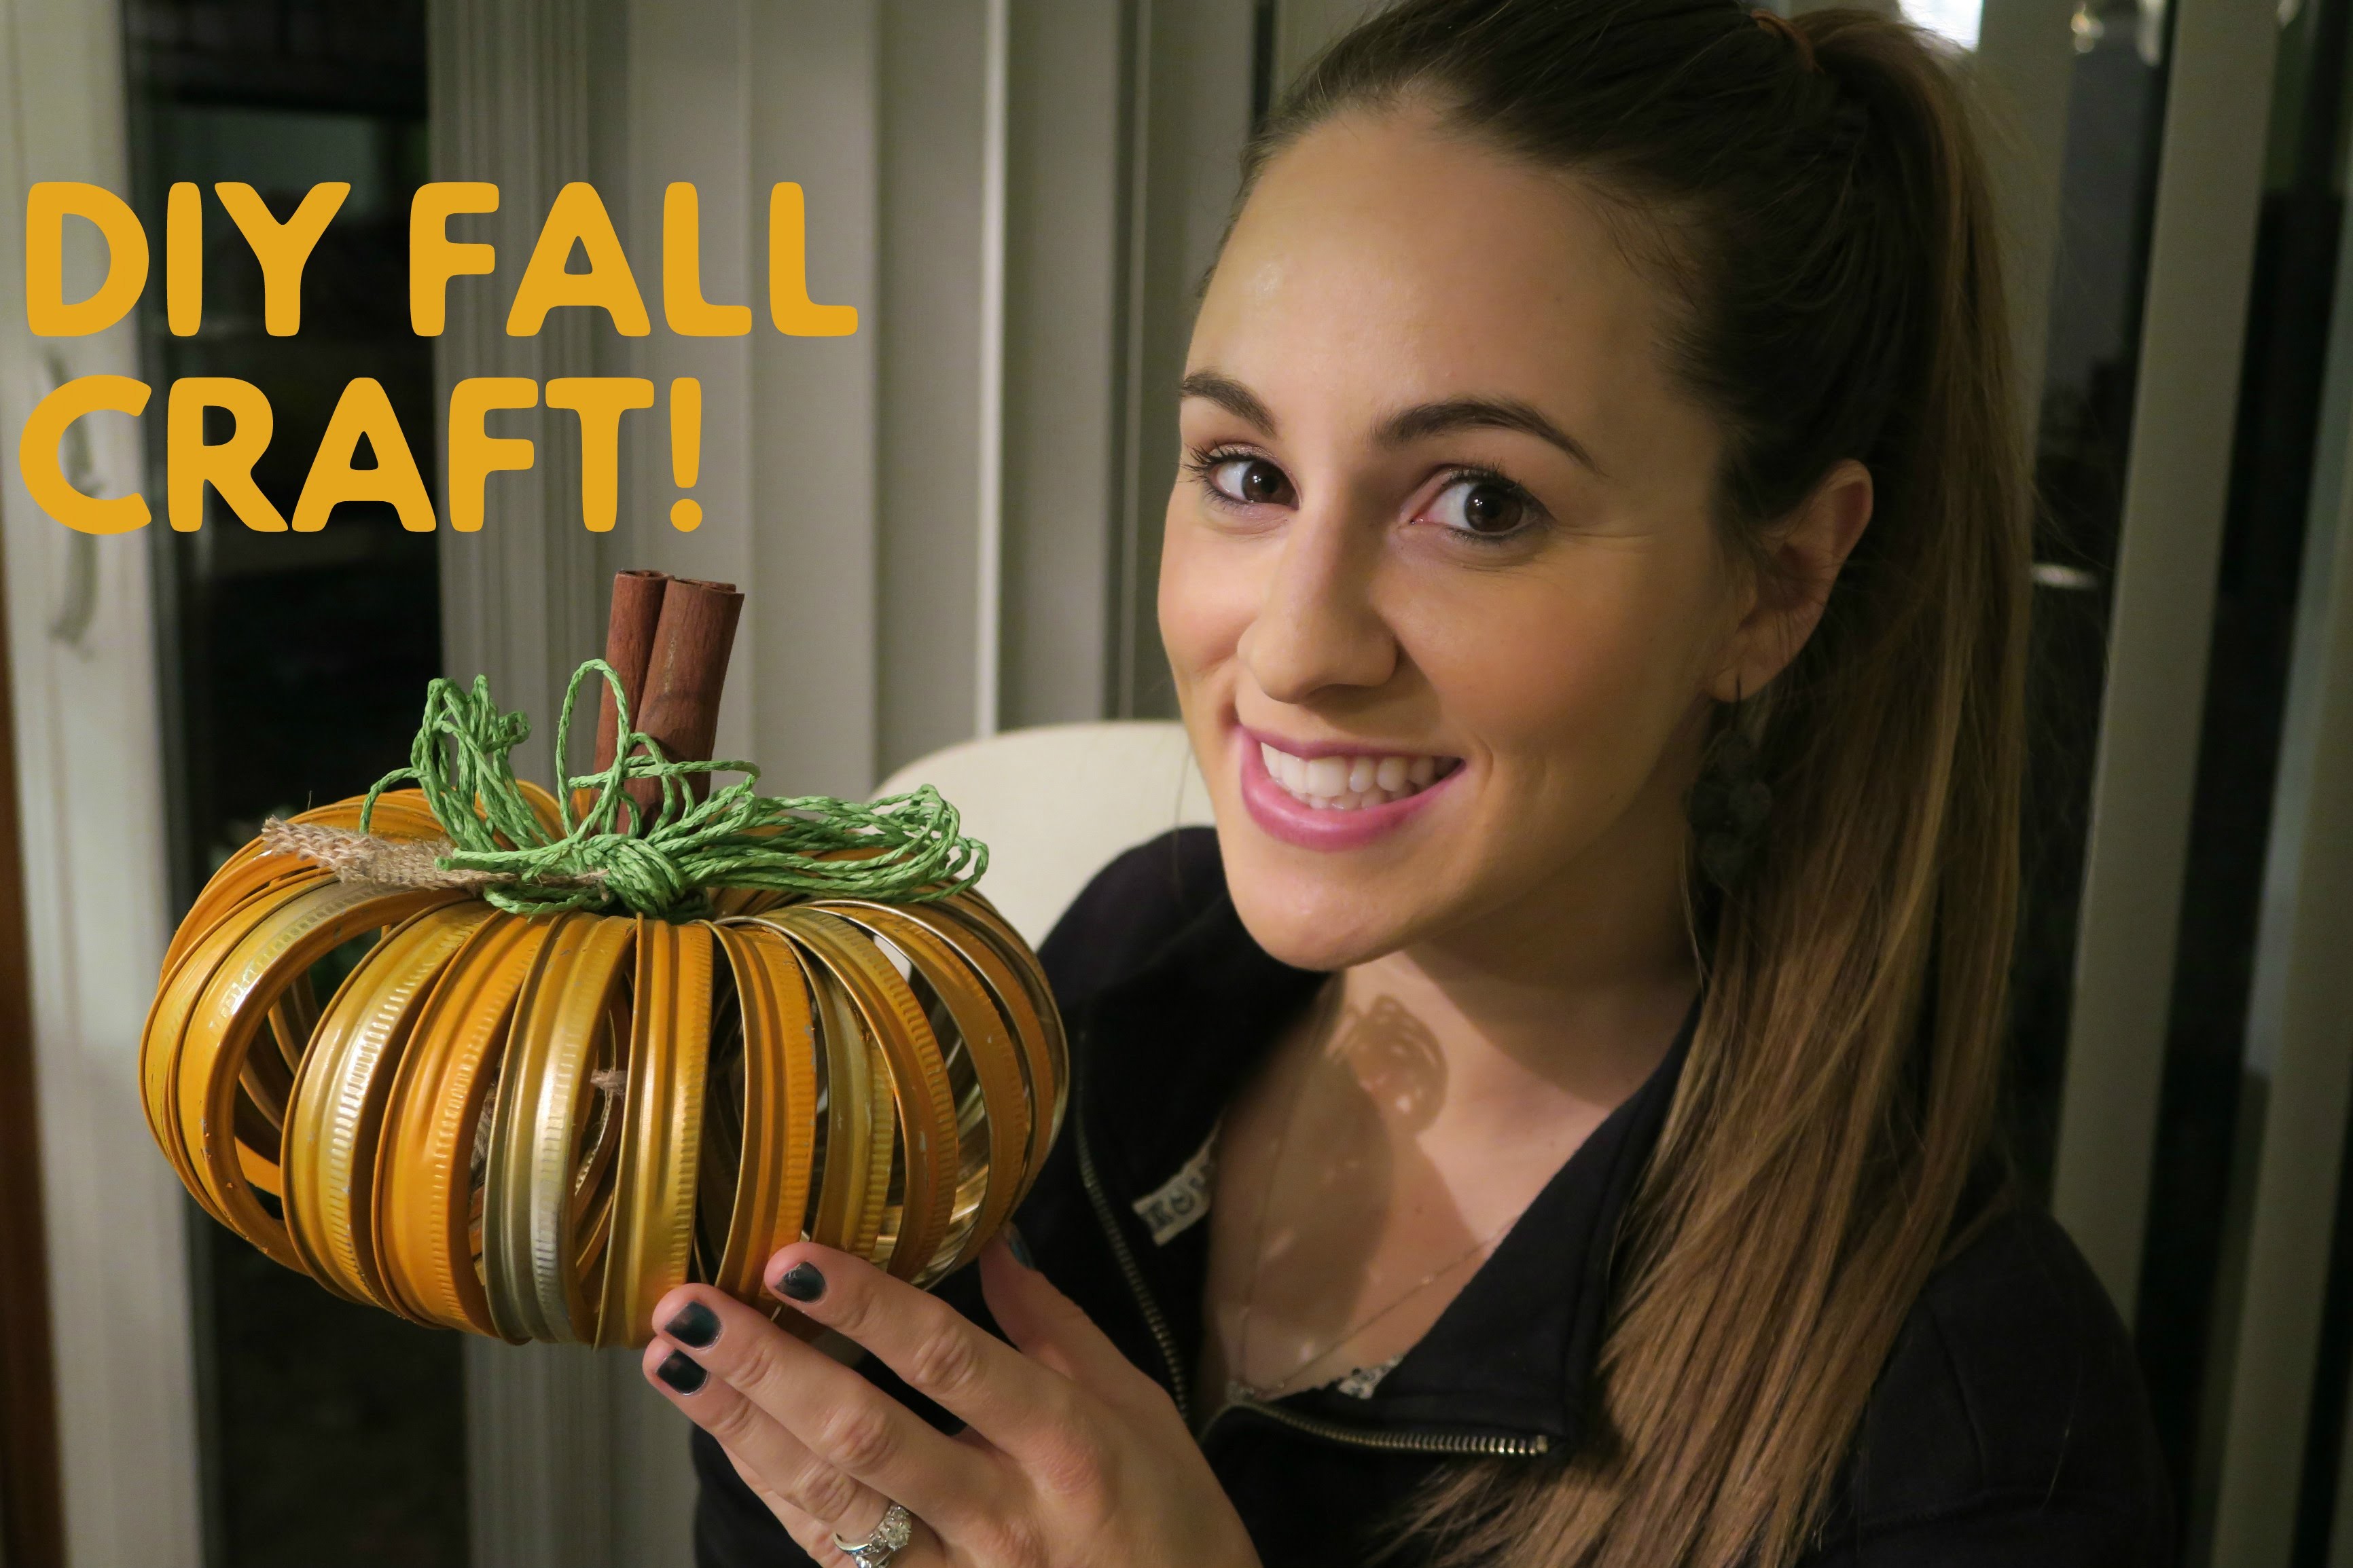 DIY FALL CRAFT AND GIVEAWAY!